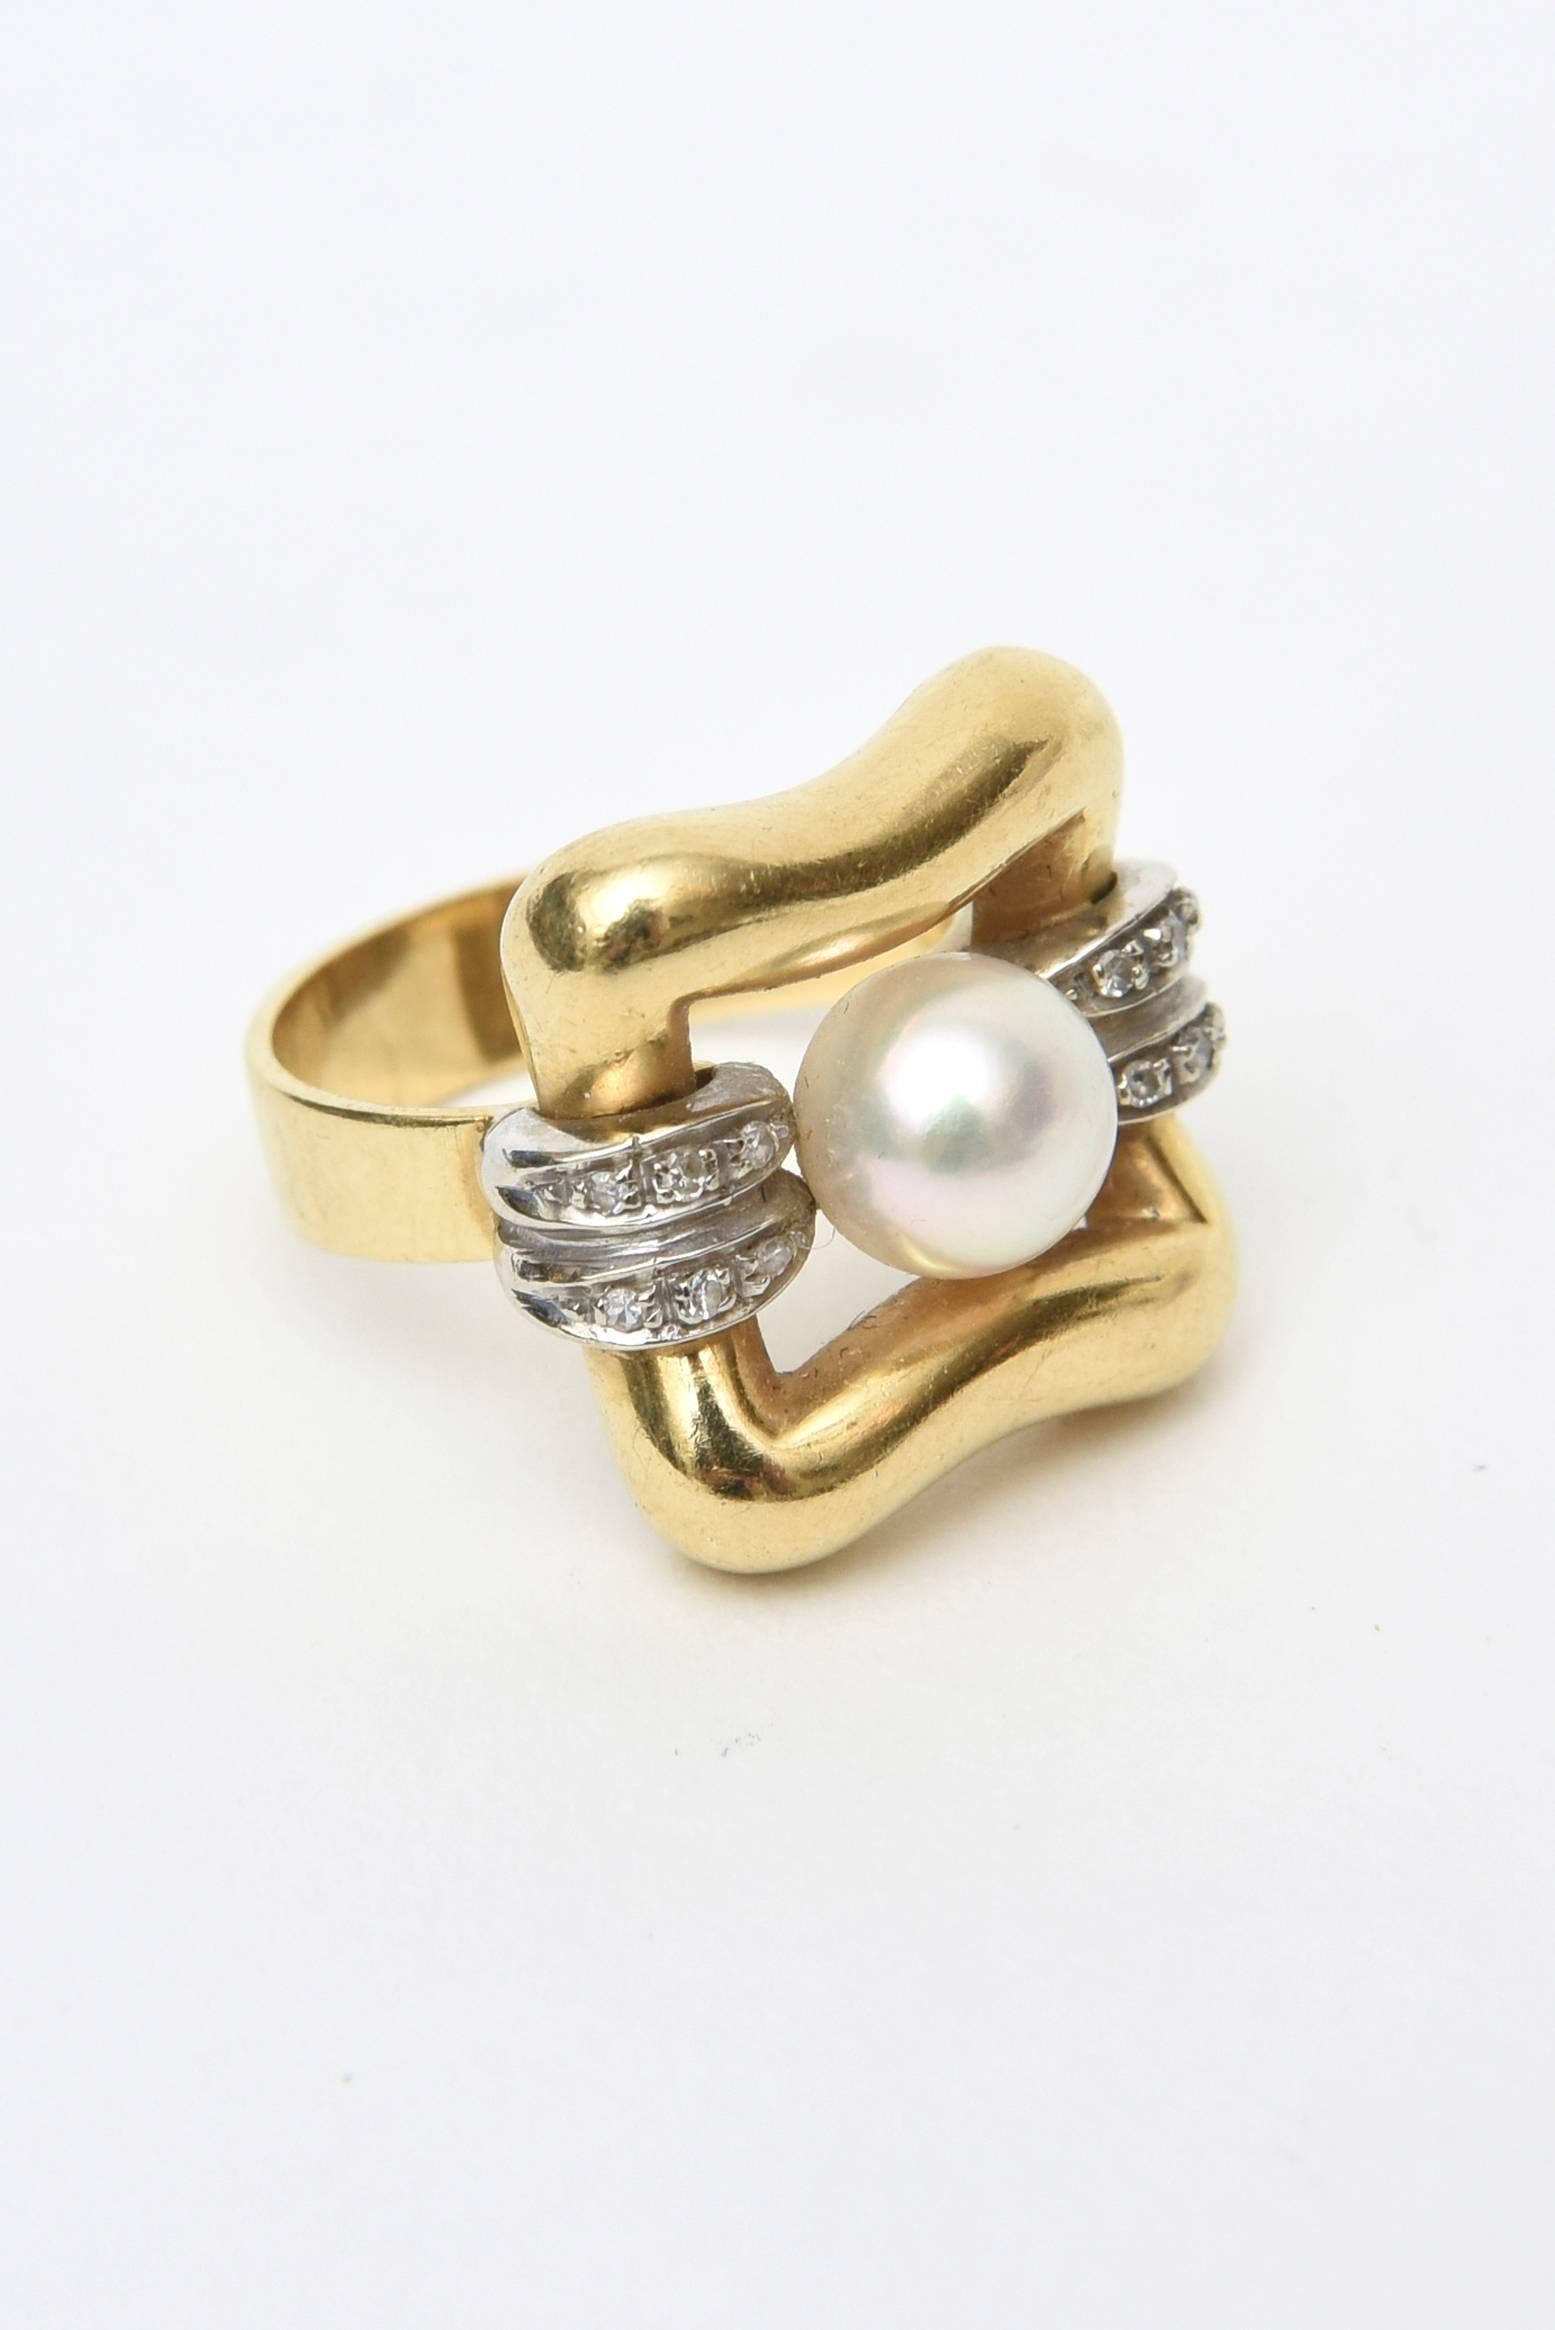 This lovely Italian ring is au so courant with it's setting of the combination of 18 karat yellow gold and pearl
inset with two bands of small diamonds on each side. It is stamped Italy 18K.
The ring is a size 6 and the pearl measures 8mm. It is